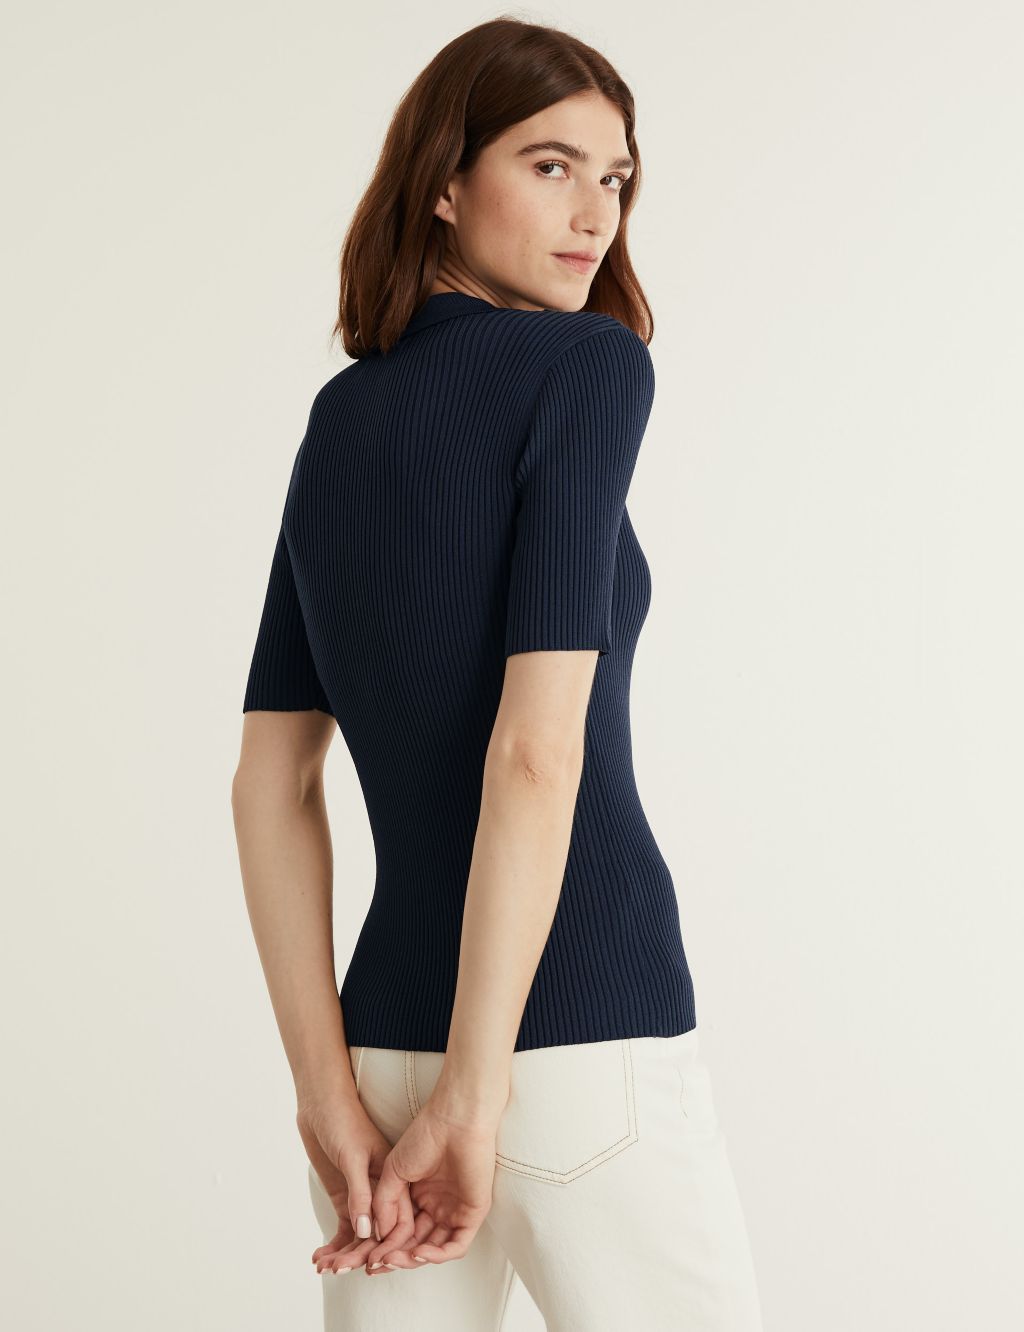 Ribbed Collared V-Neck Short Sleeve Top image 4